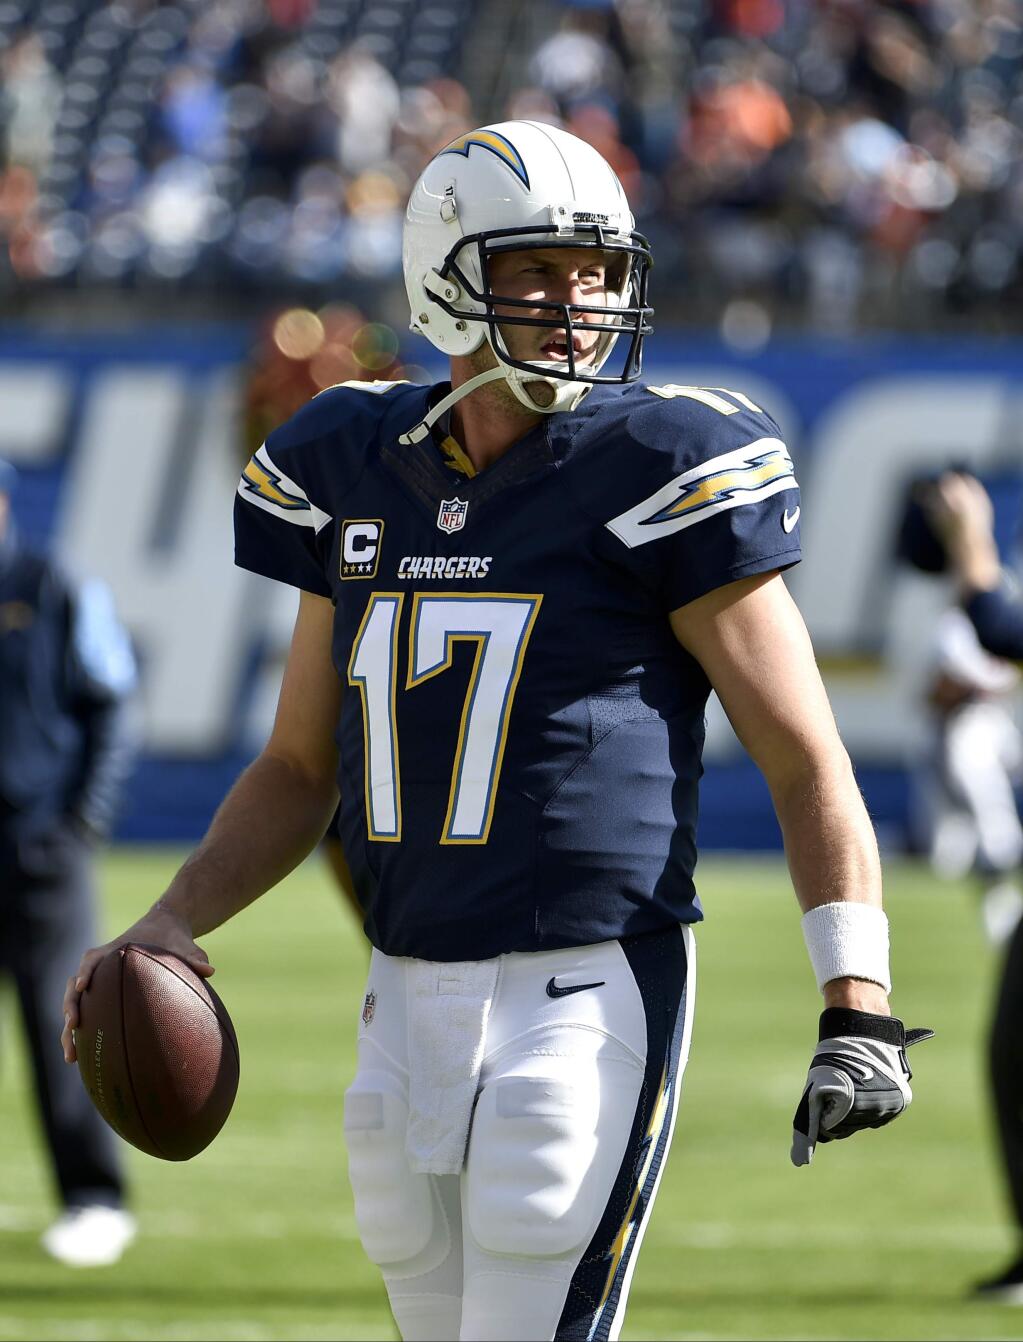 San Diego Chargers quarterback Philip Rivers warms up before an NFL football game against the Denver Broncos Sunday, Dec. 14, 2014, in San Diego. (AP Photo/Denis Poroy)